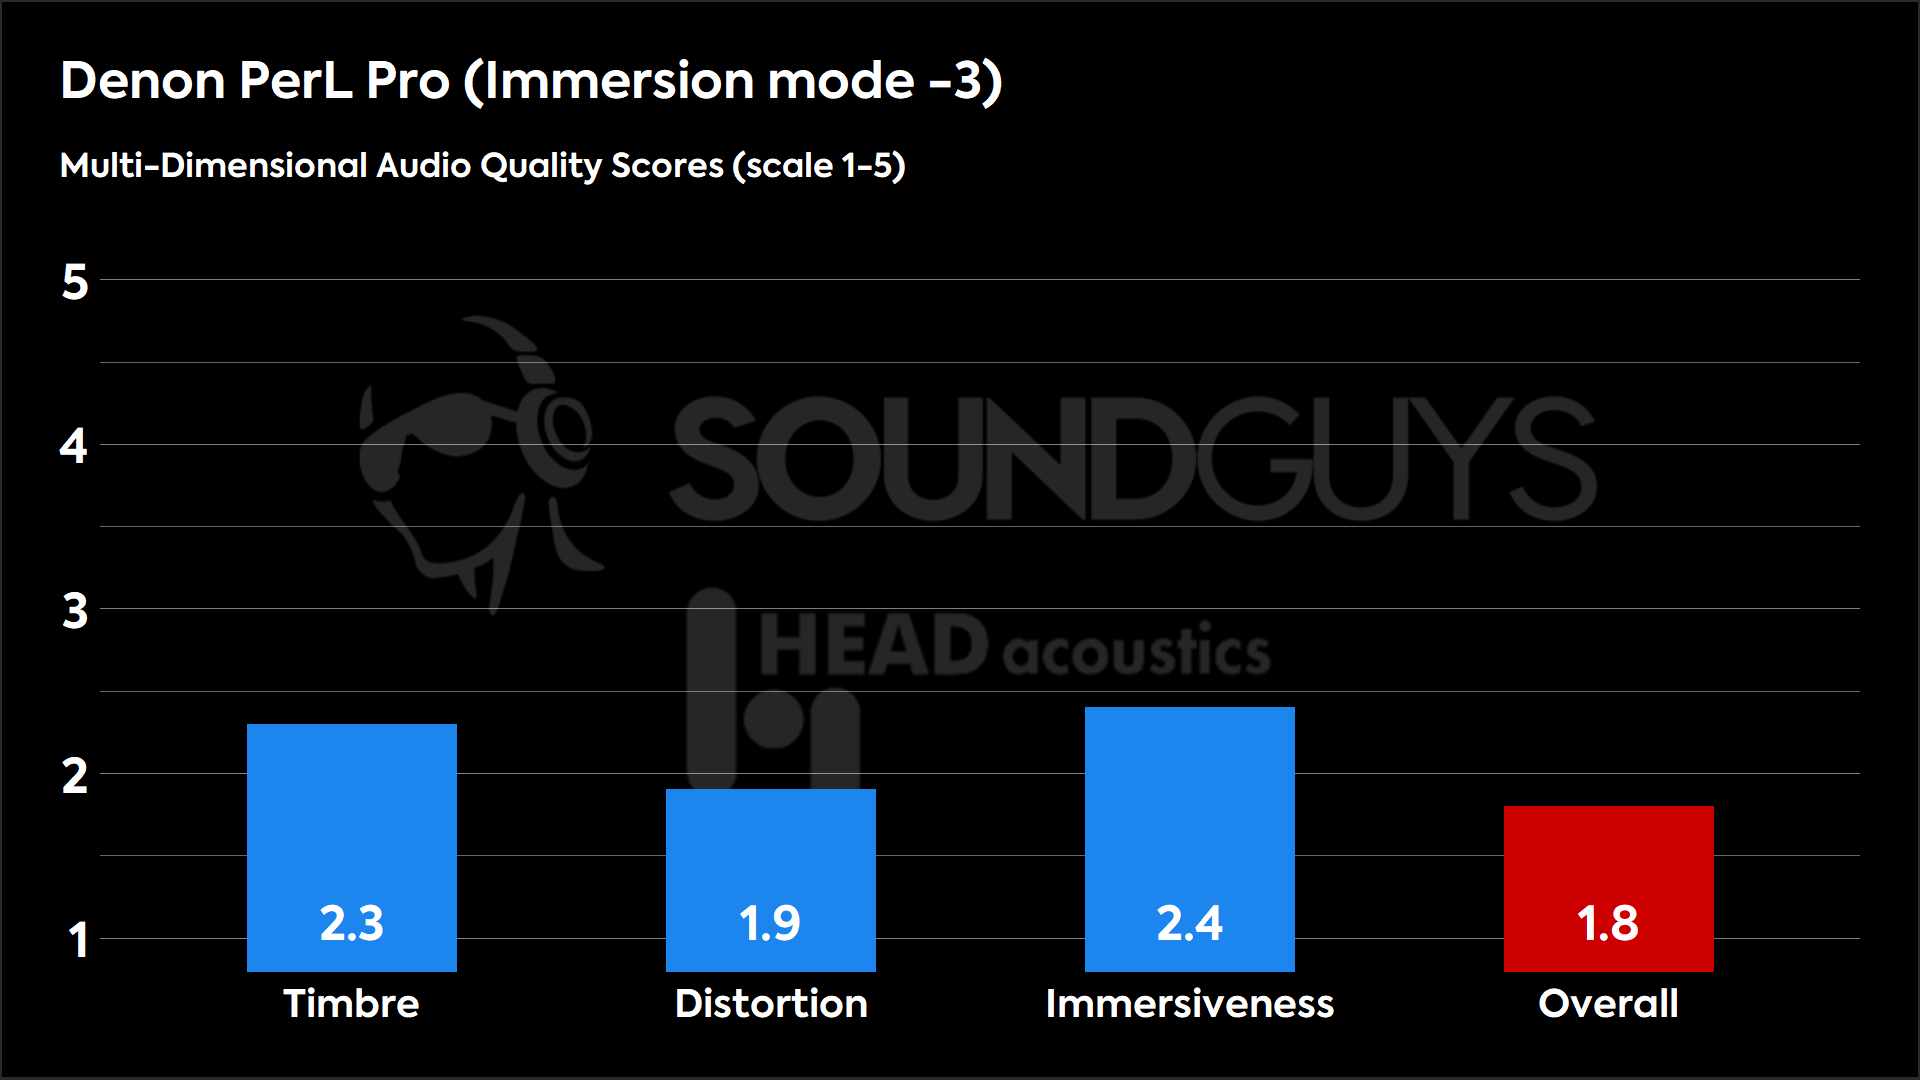 A barplot showing the relatively low Multi-Dimensional Audio Quality Scores of the Denon PerL Pro.